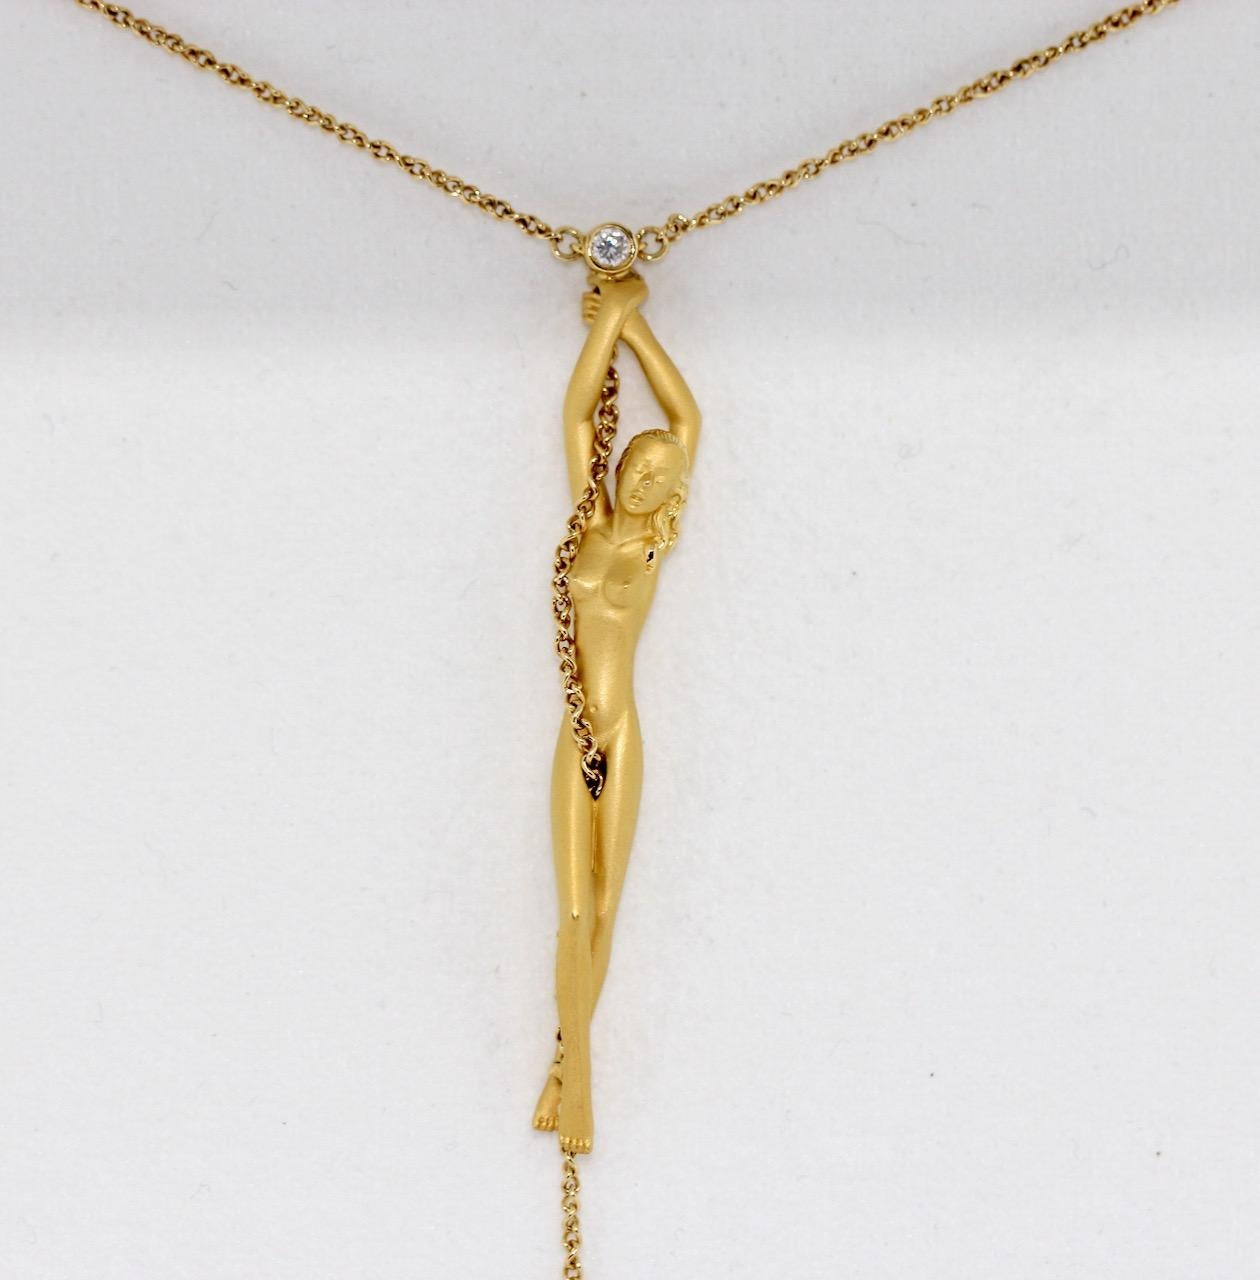 Carrera y Carrera necklace, necklace with pendant in the form of a nude woman, 18k gold with diamond.

Length from hands (with diamond) to feet, measured without chain: 60mm.

Including original packaging and certificate of authenticity from our